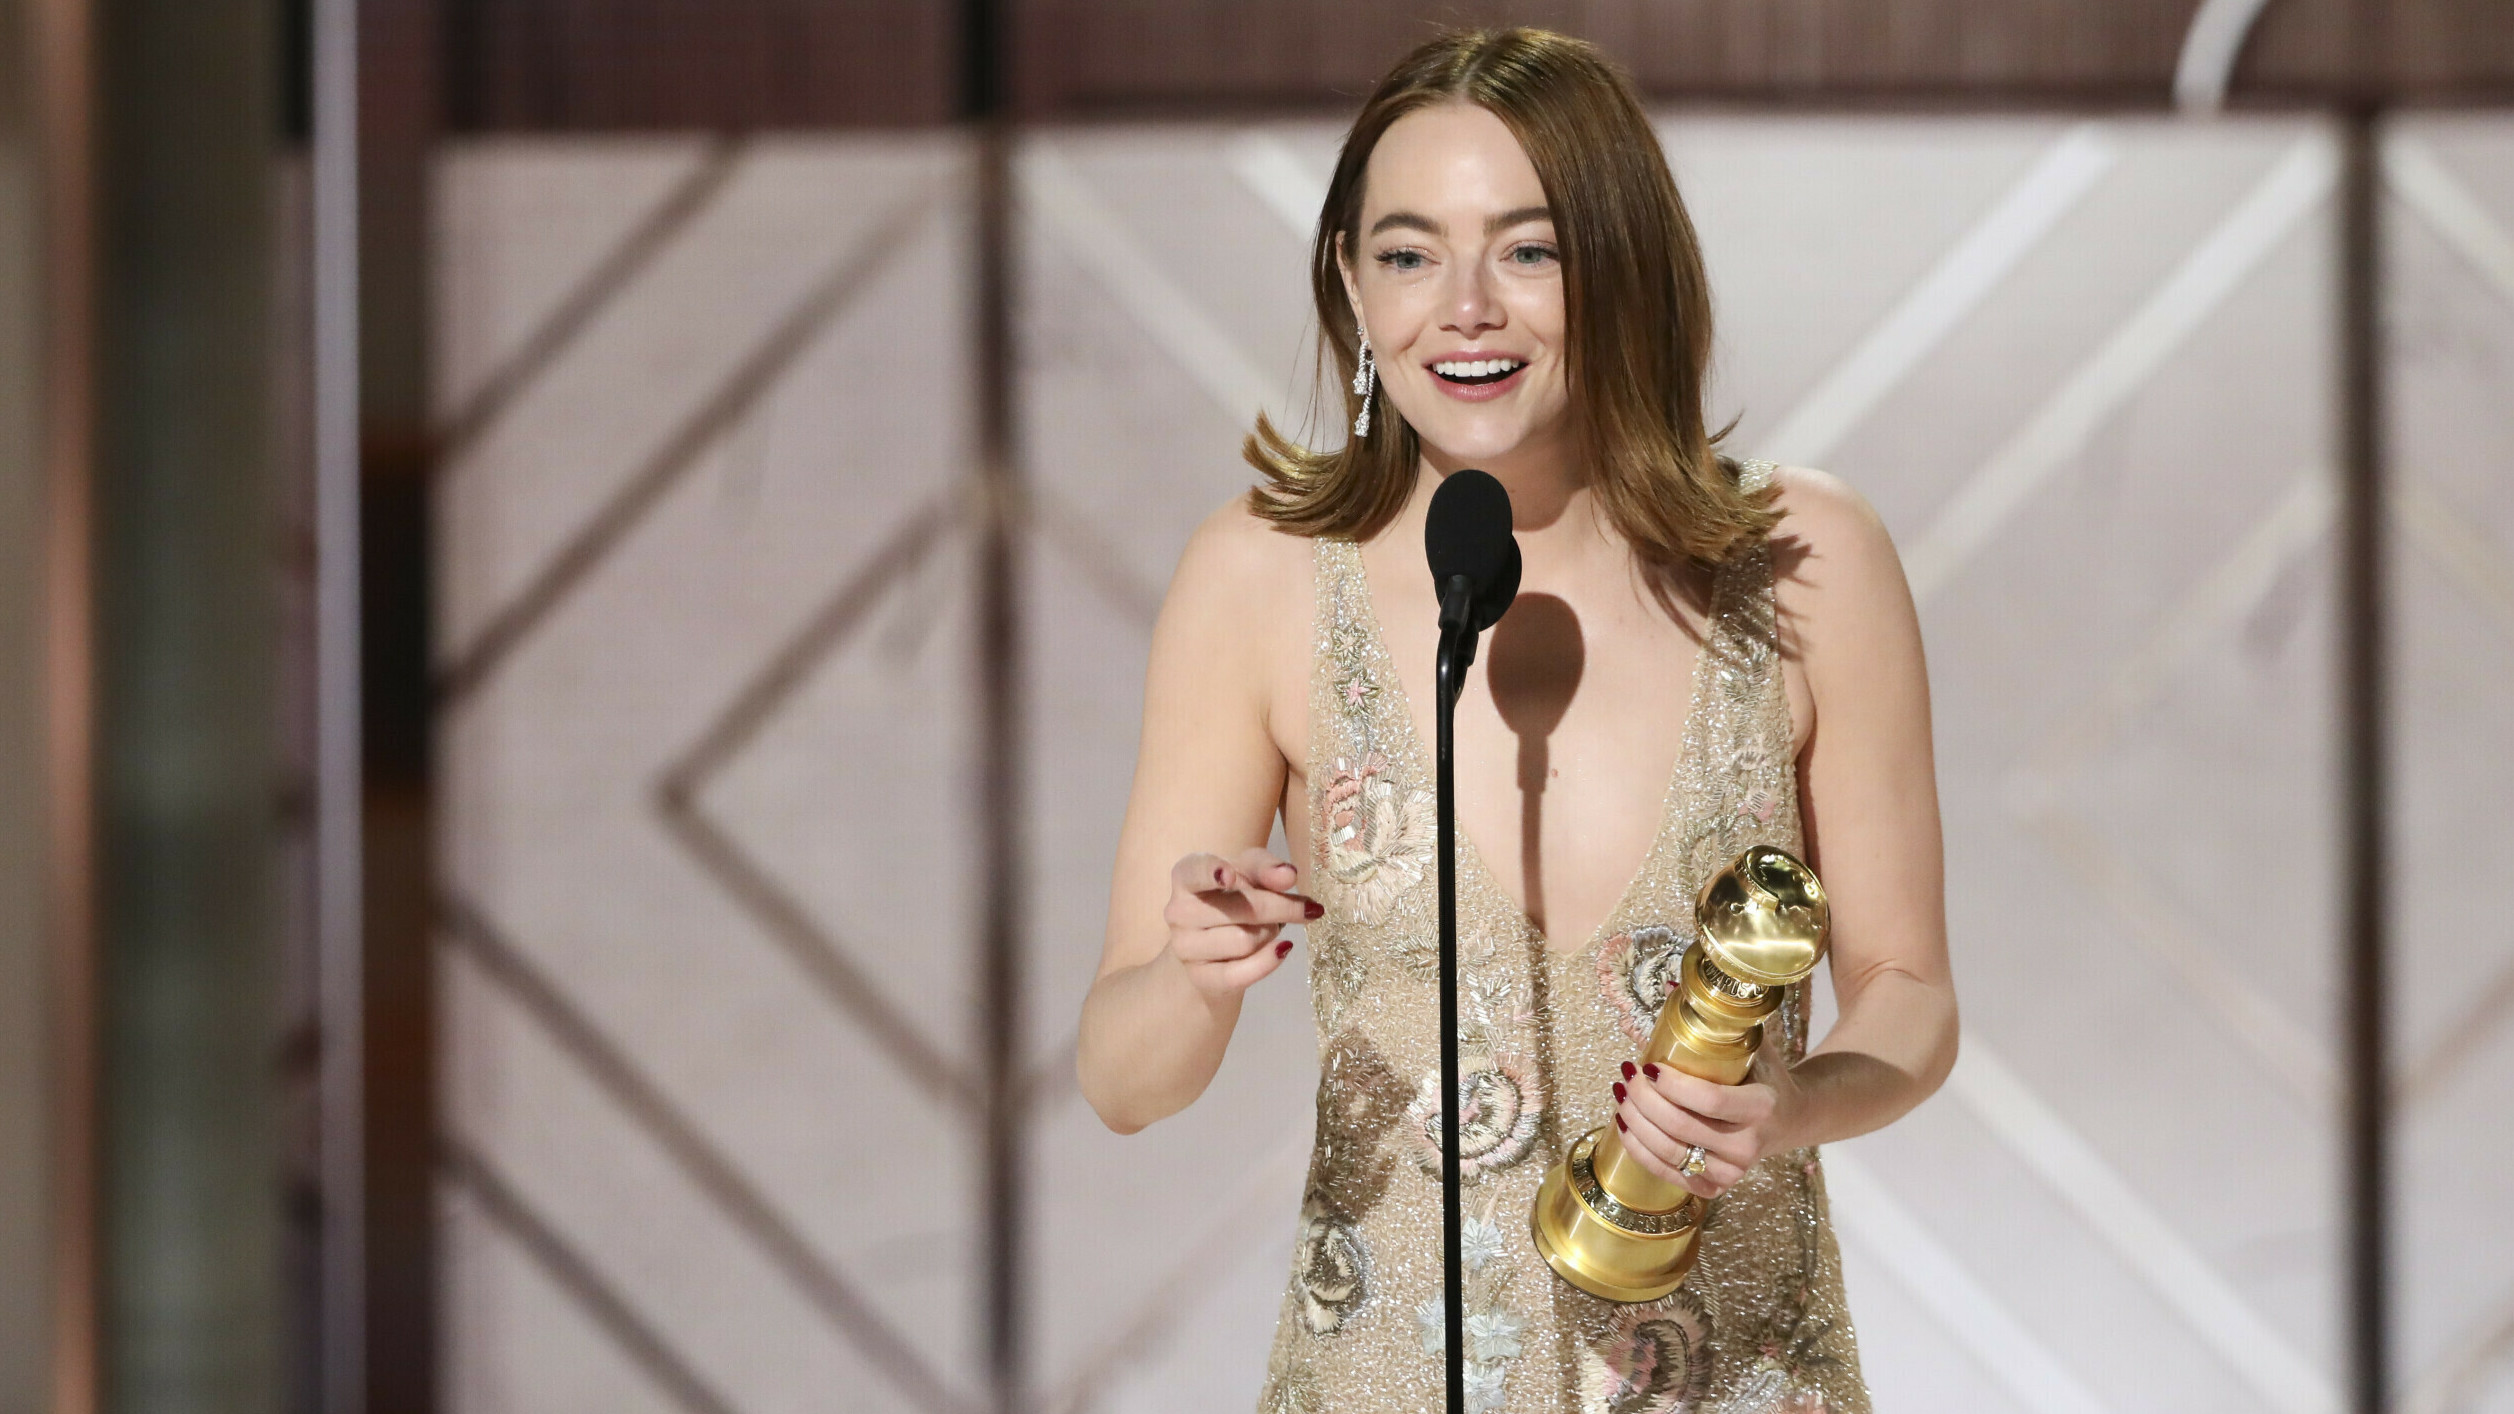 This image released by CBS shows Emma Stone accepting the award for best female actor in a motion picture for her role